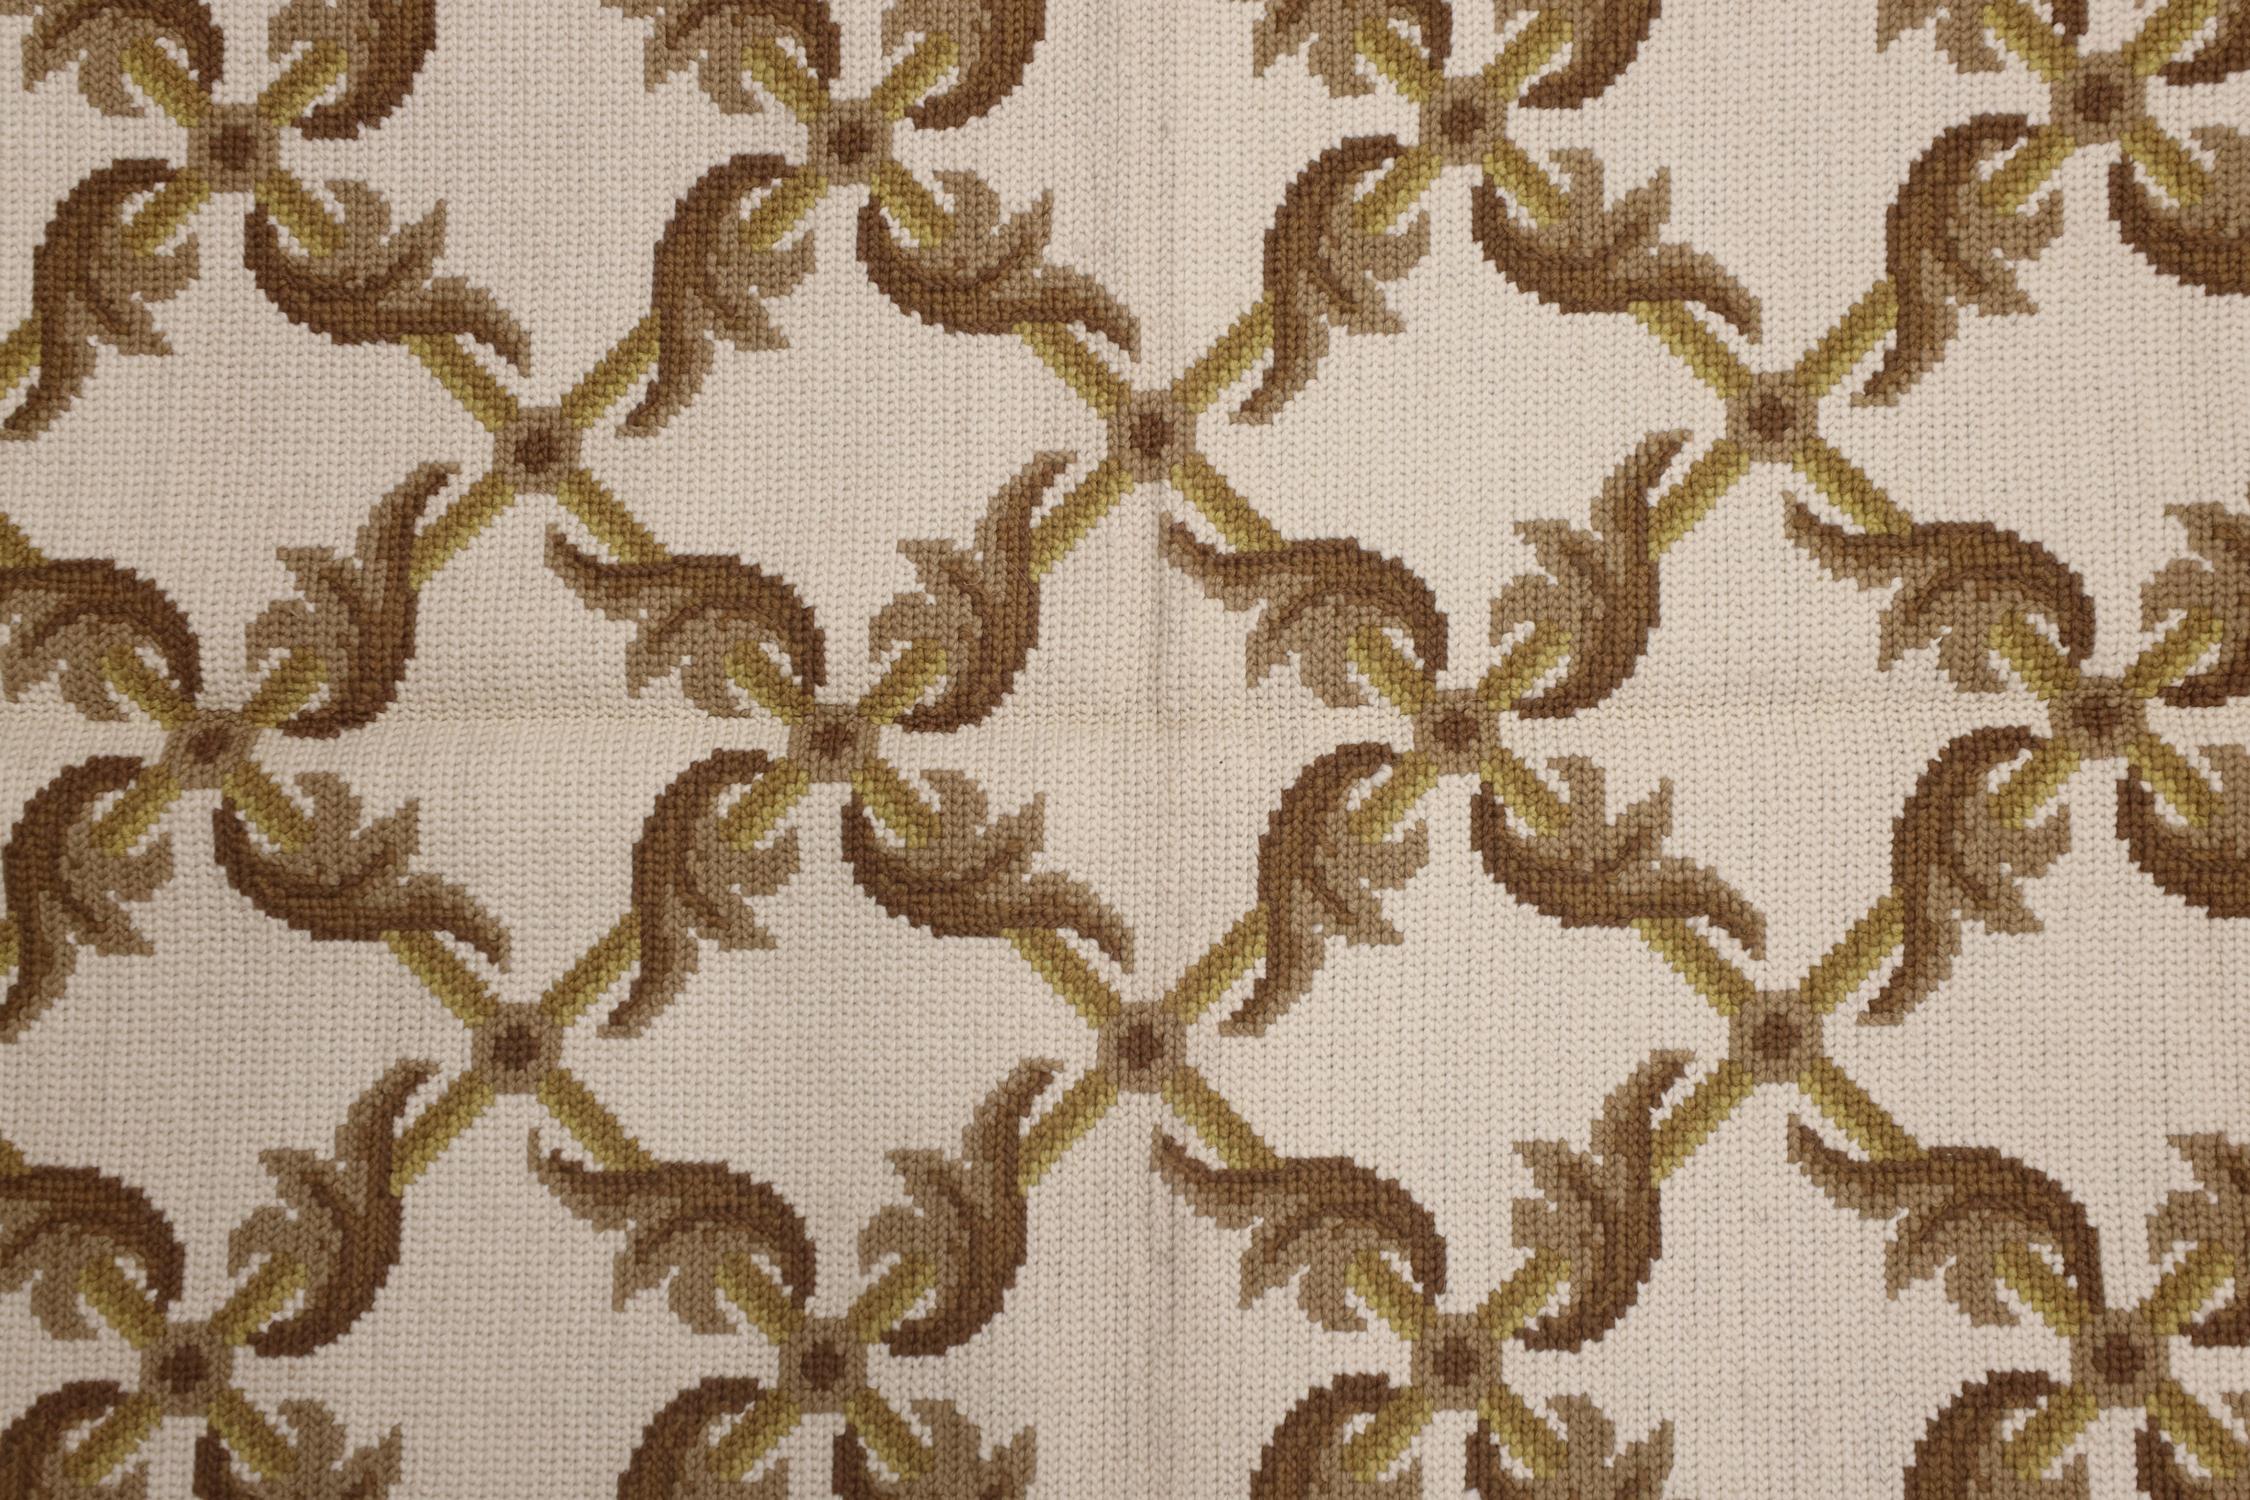 French Provincial Traditional Needlepoint Rug, Handwoven Wool Beige Carpet Area Rug For Sale